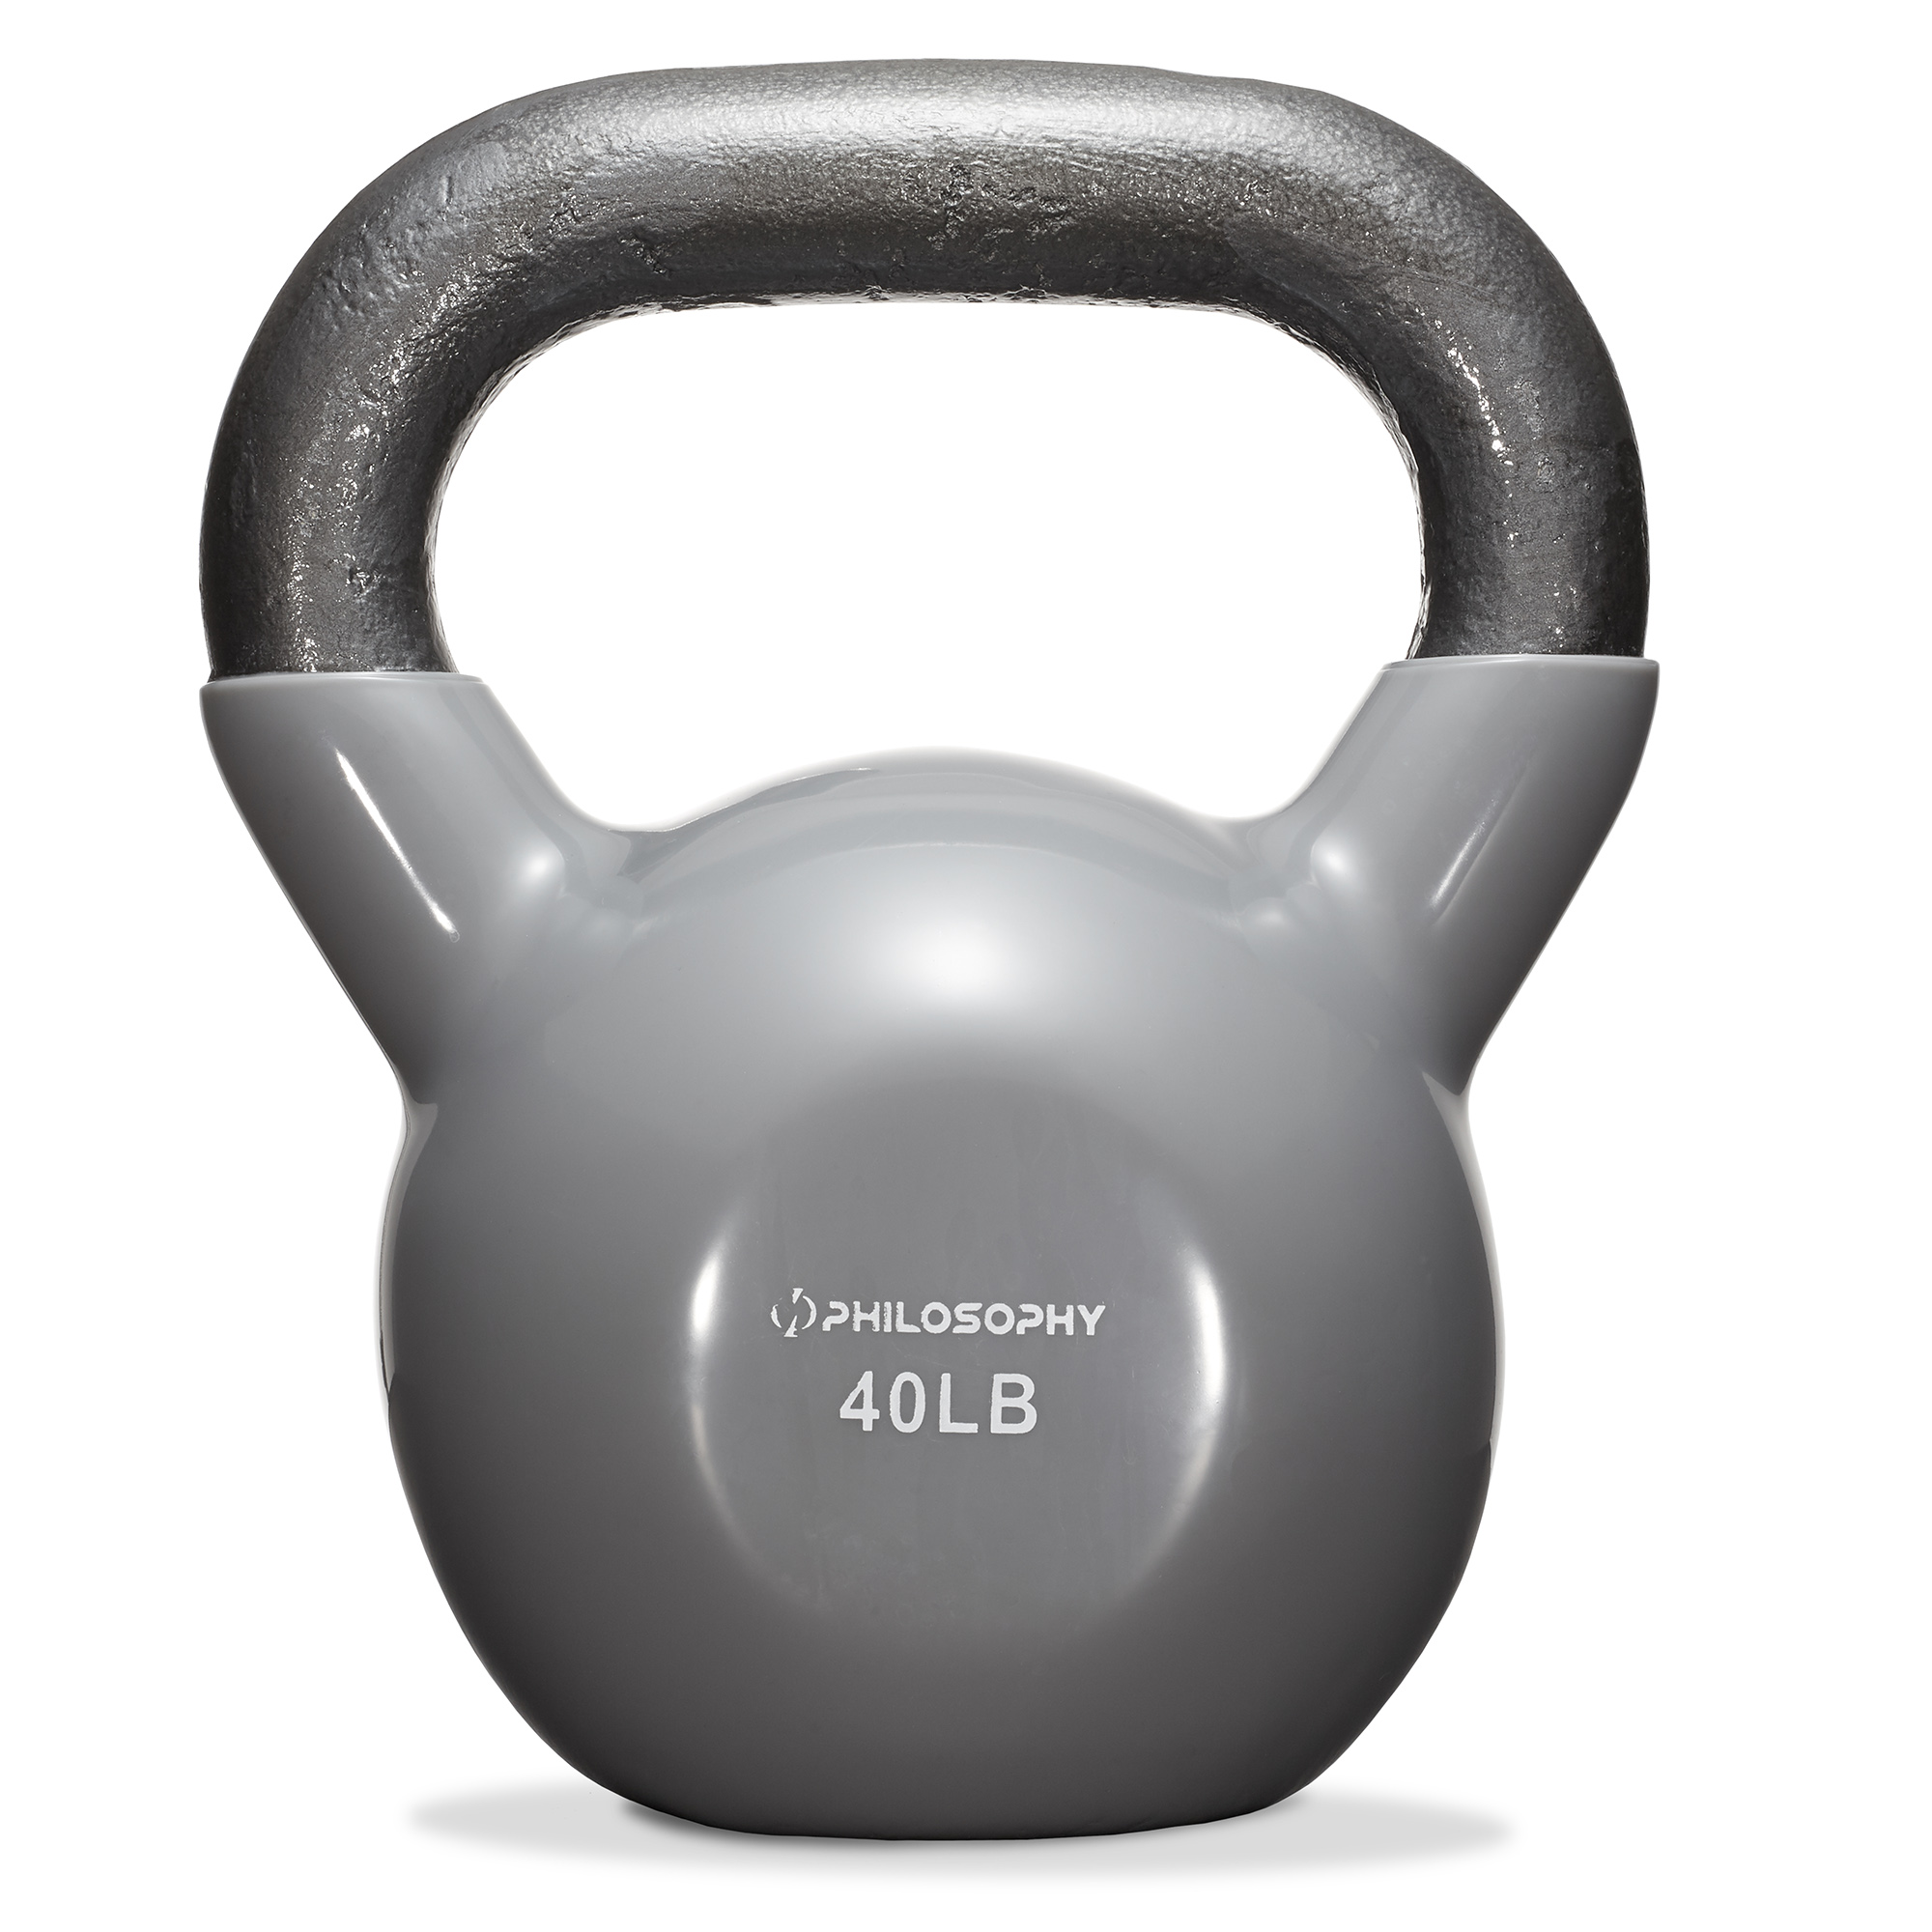 Philosophy Gym 40 lb Vinyl Coated Cast Iron Kettlebell, 40 Pound Weight